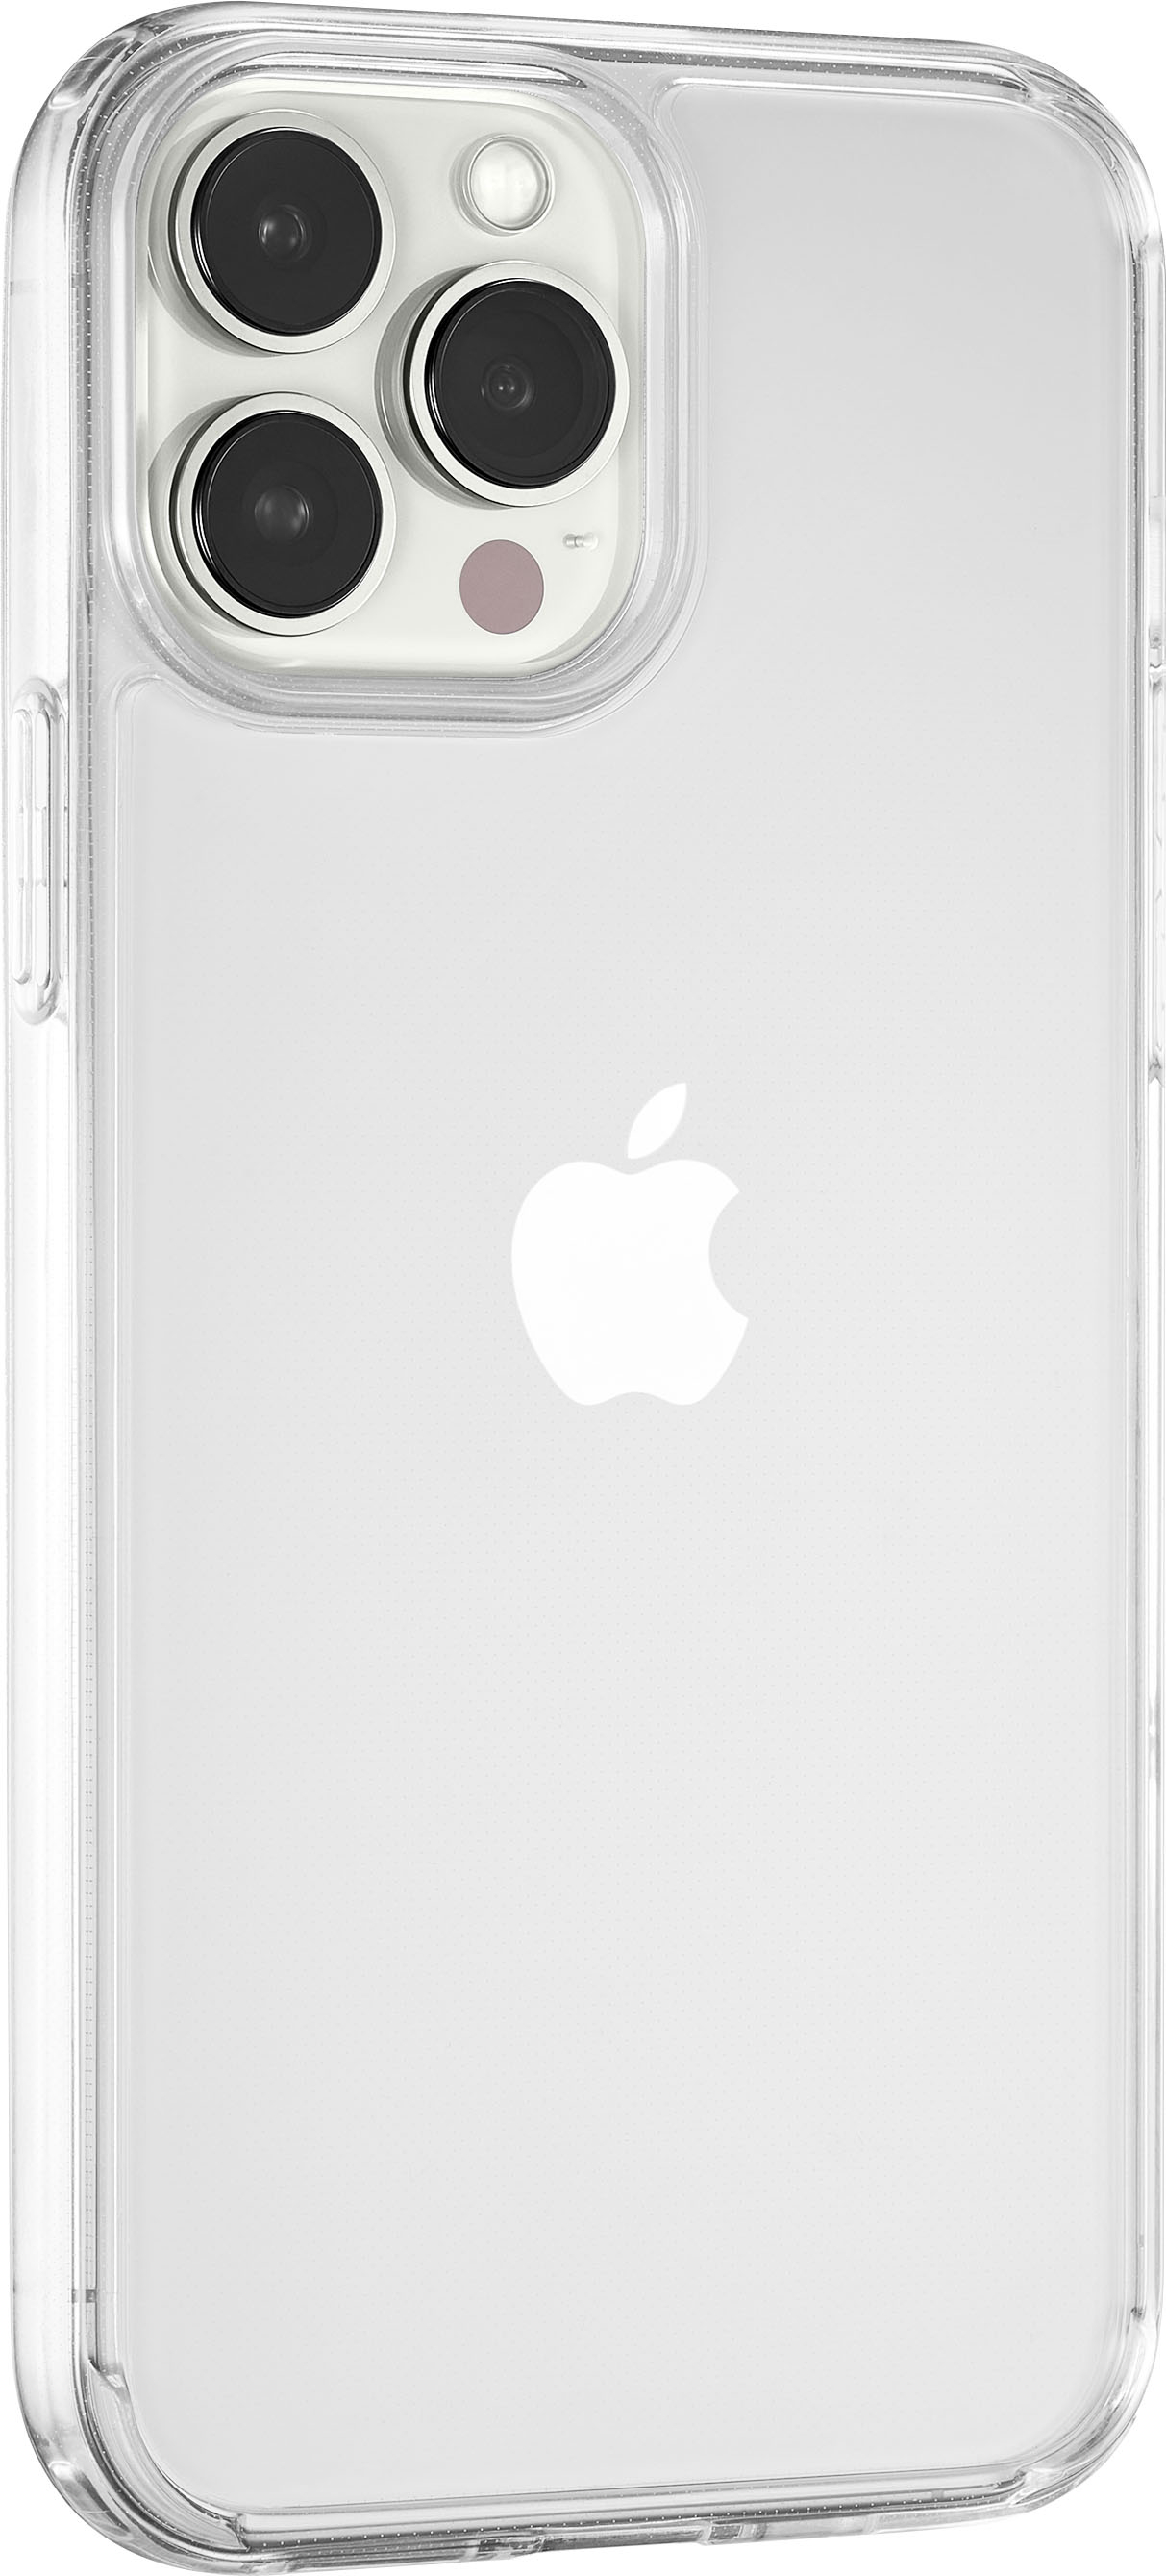 Angle View: Insignia™ - Hard Shell Case for iPhone 13 Pro Max and iPhone 12 Pro Max - Clear